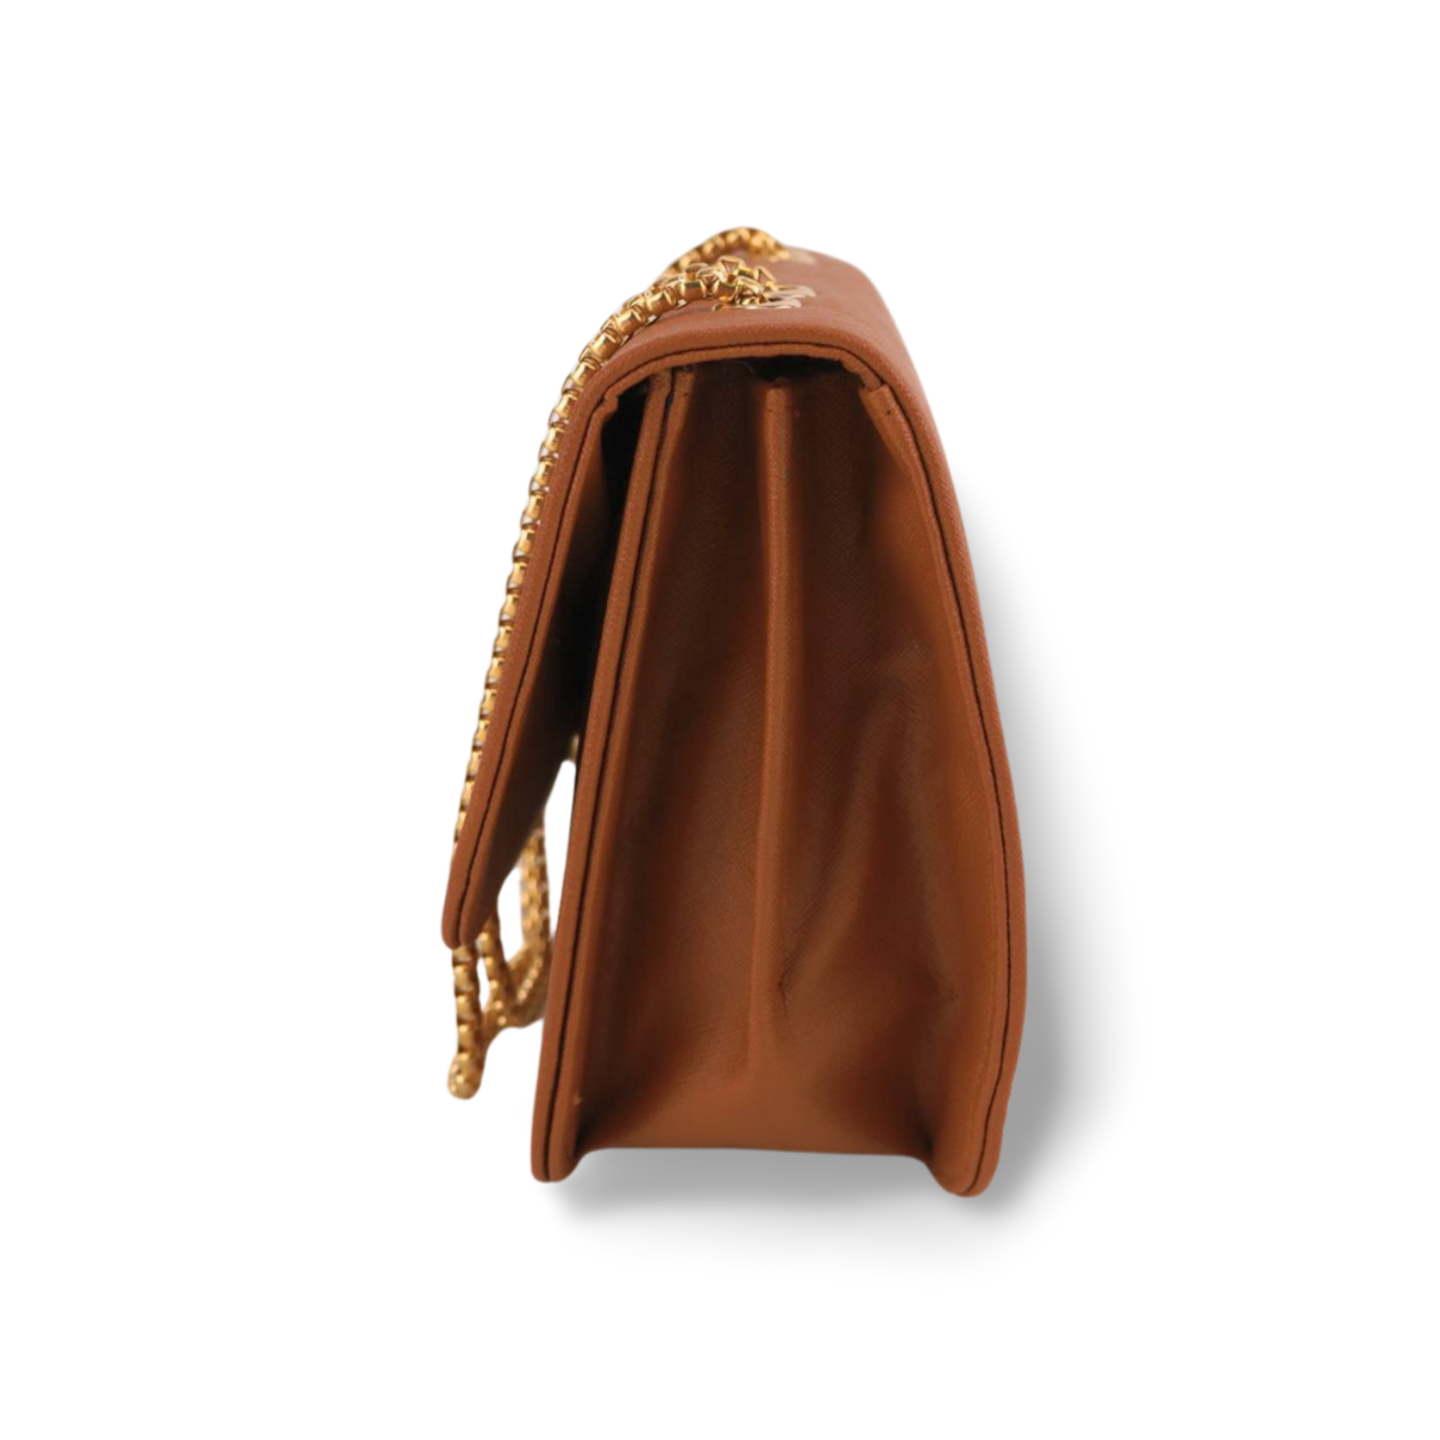 Small Leather Shoulder Bag: Sophisticated Style & Versatility